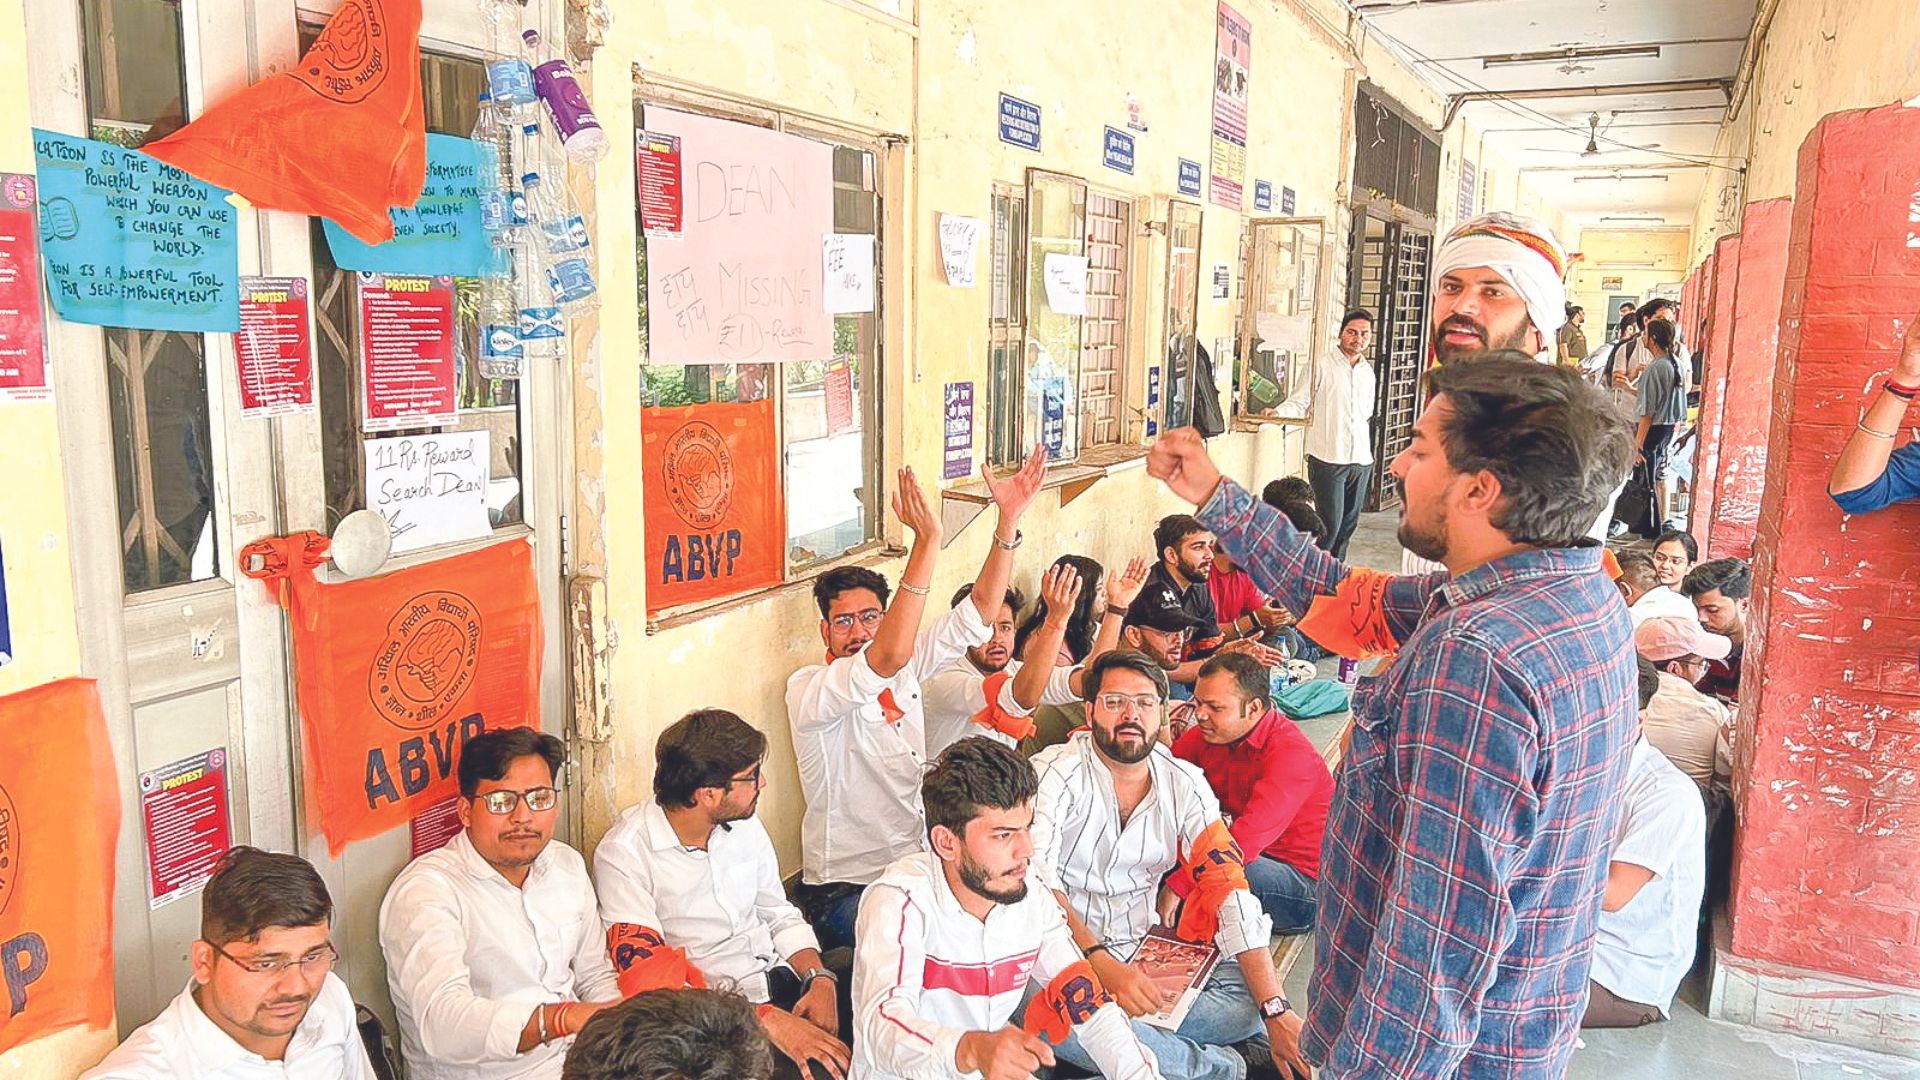 ABVP protests over issues at DU’s law faculty